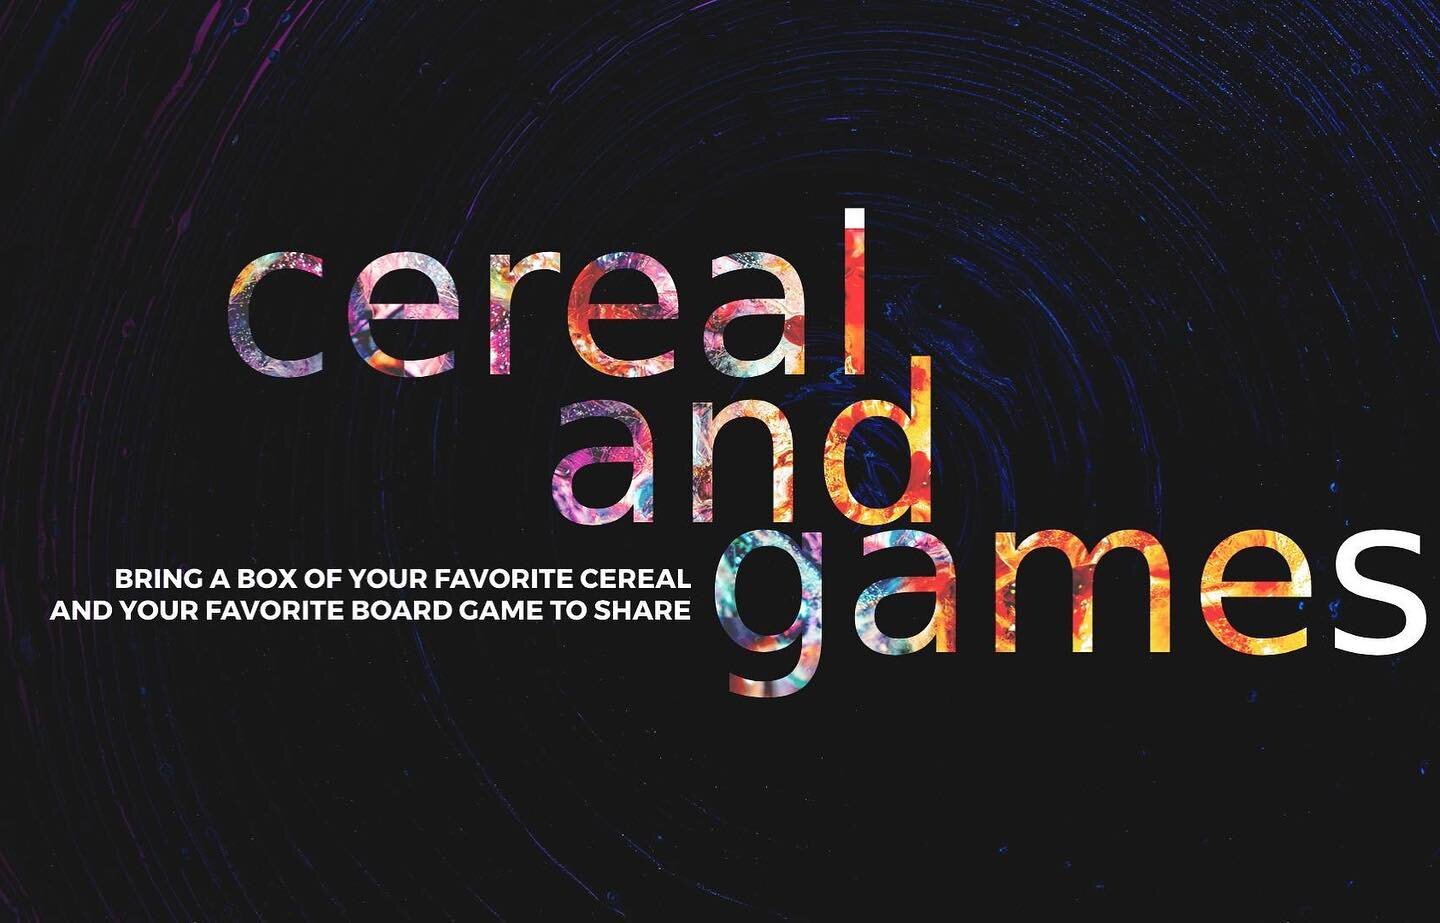 THIS WEDNESDAY:
We will be taking a break from our current series and having a fun night! Here&rsquo;s what we need:
1) Bring a box of your favorite cereal to share
2) Bring a fun card or board game
3) Come in your most comfortable clothes (it can be